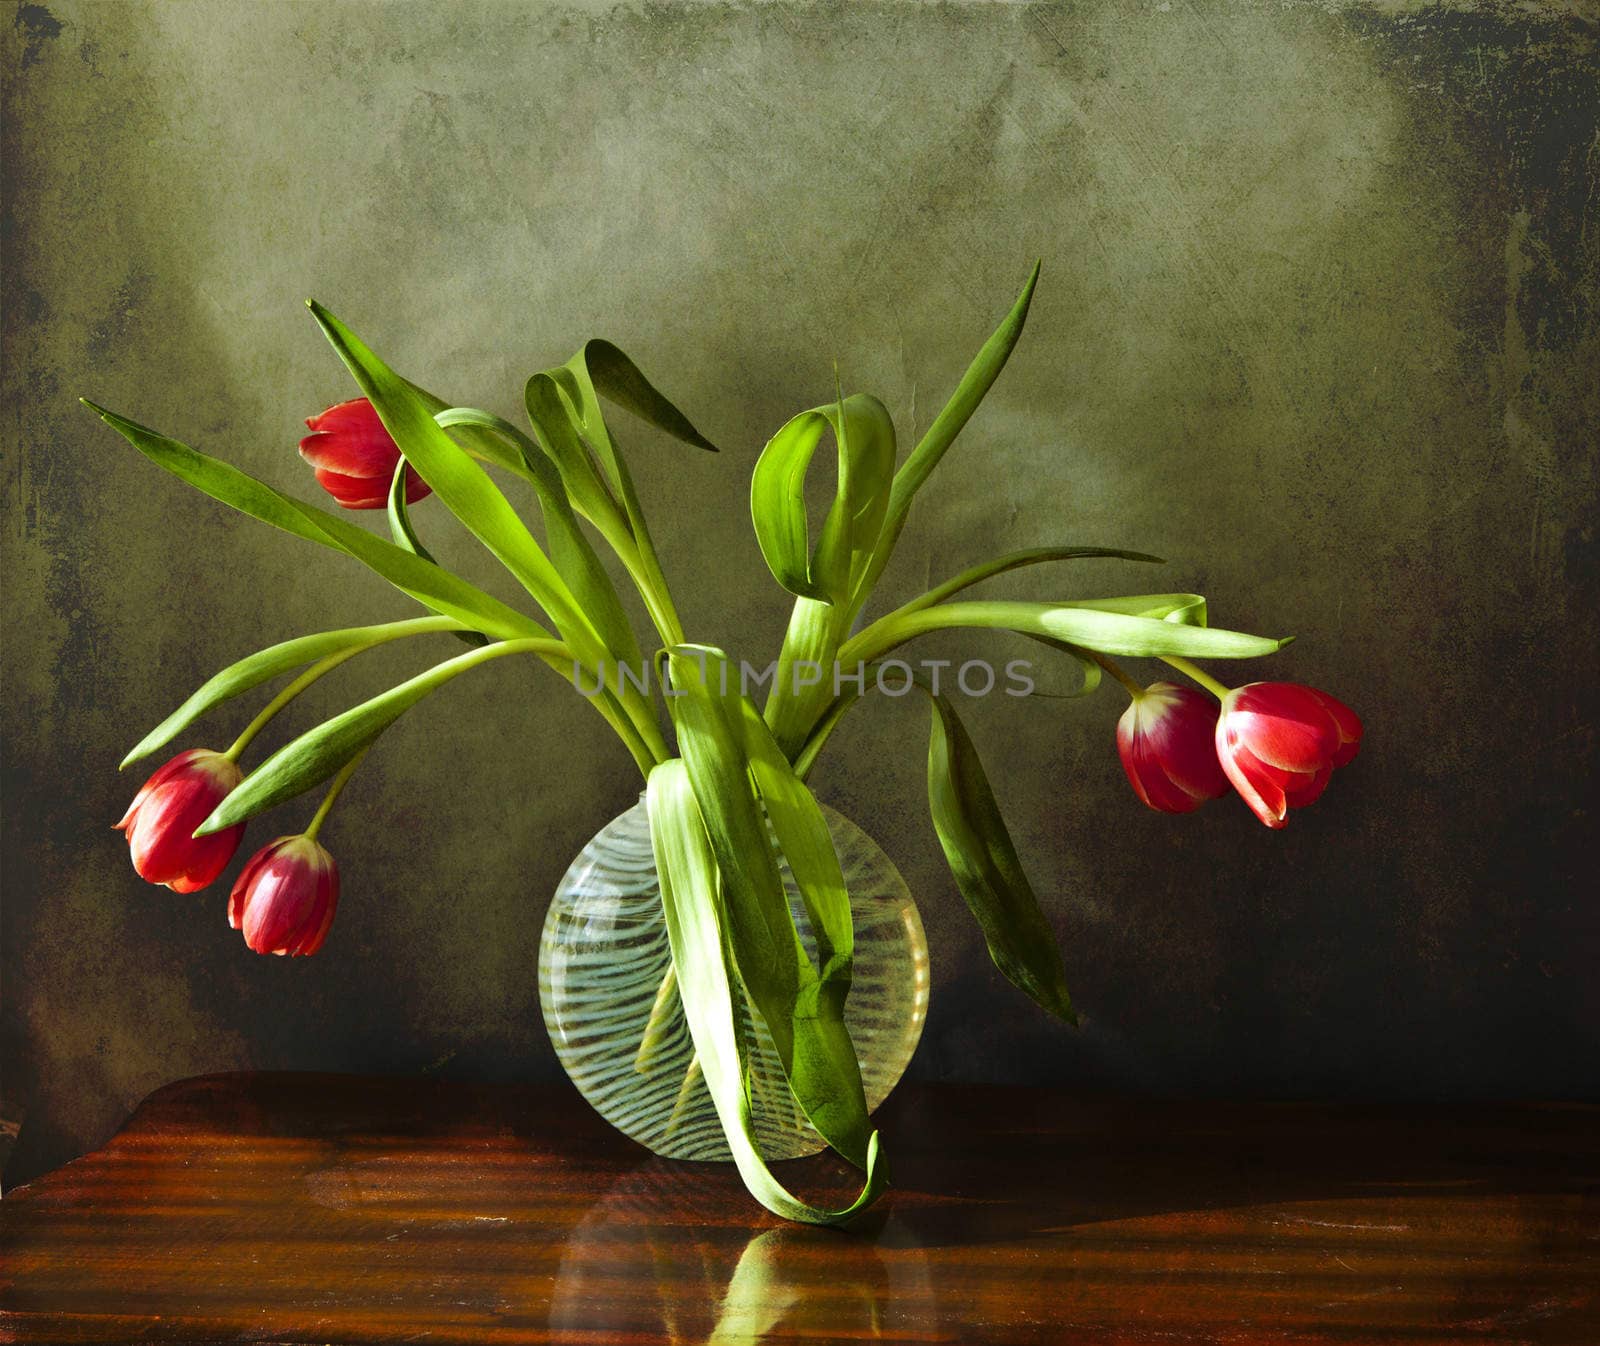 Bunch of red tulips in a glass vase on a wooden table against a green grunge wall